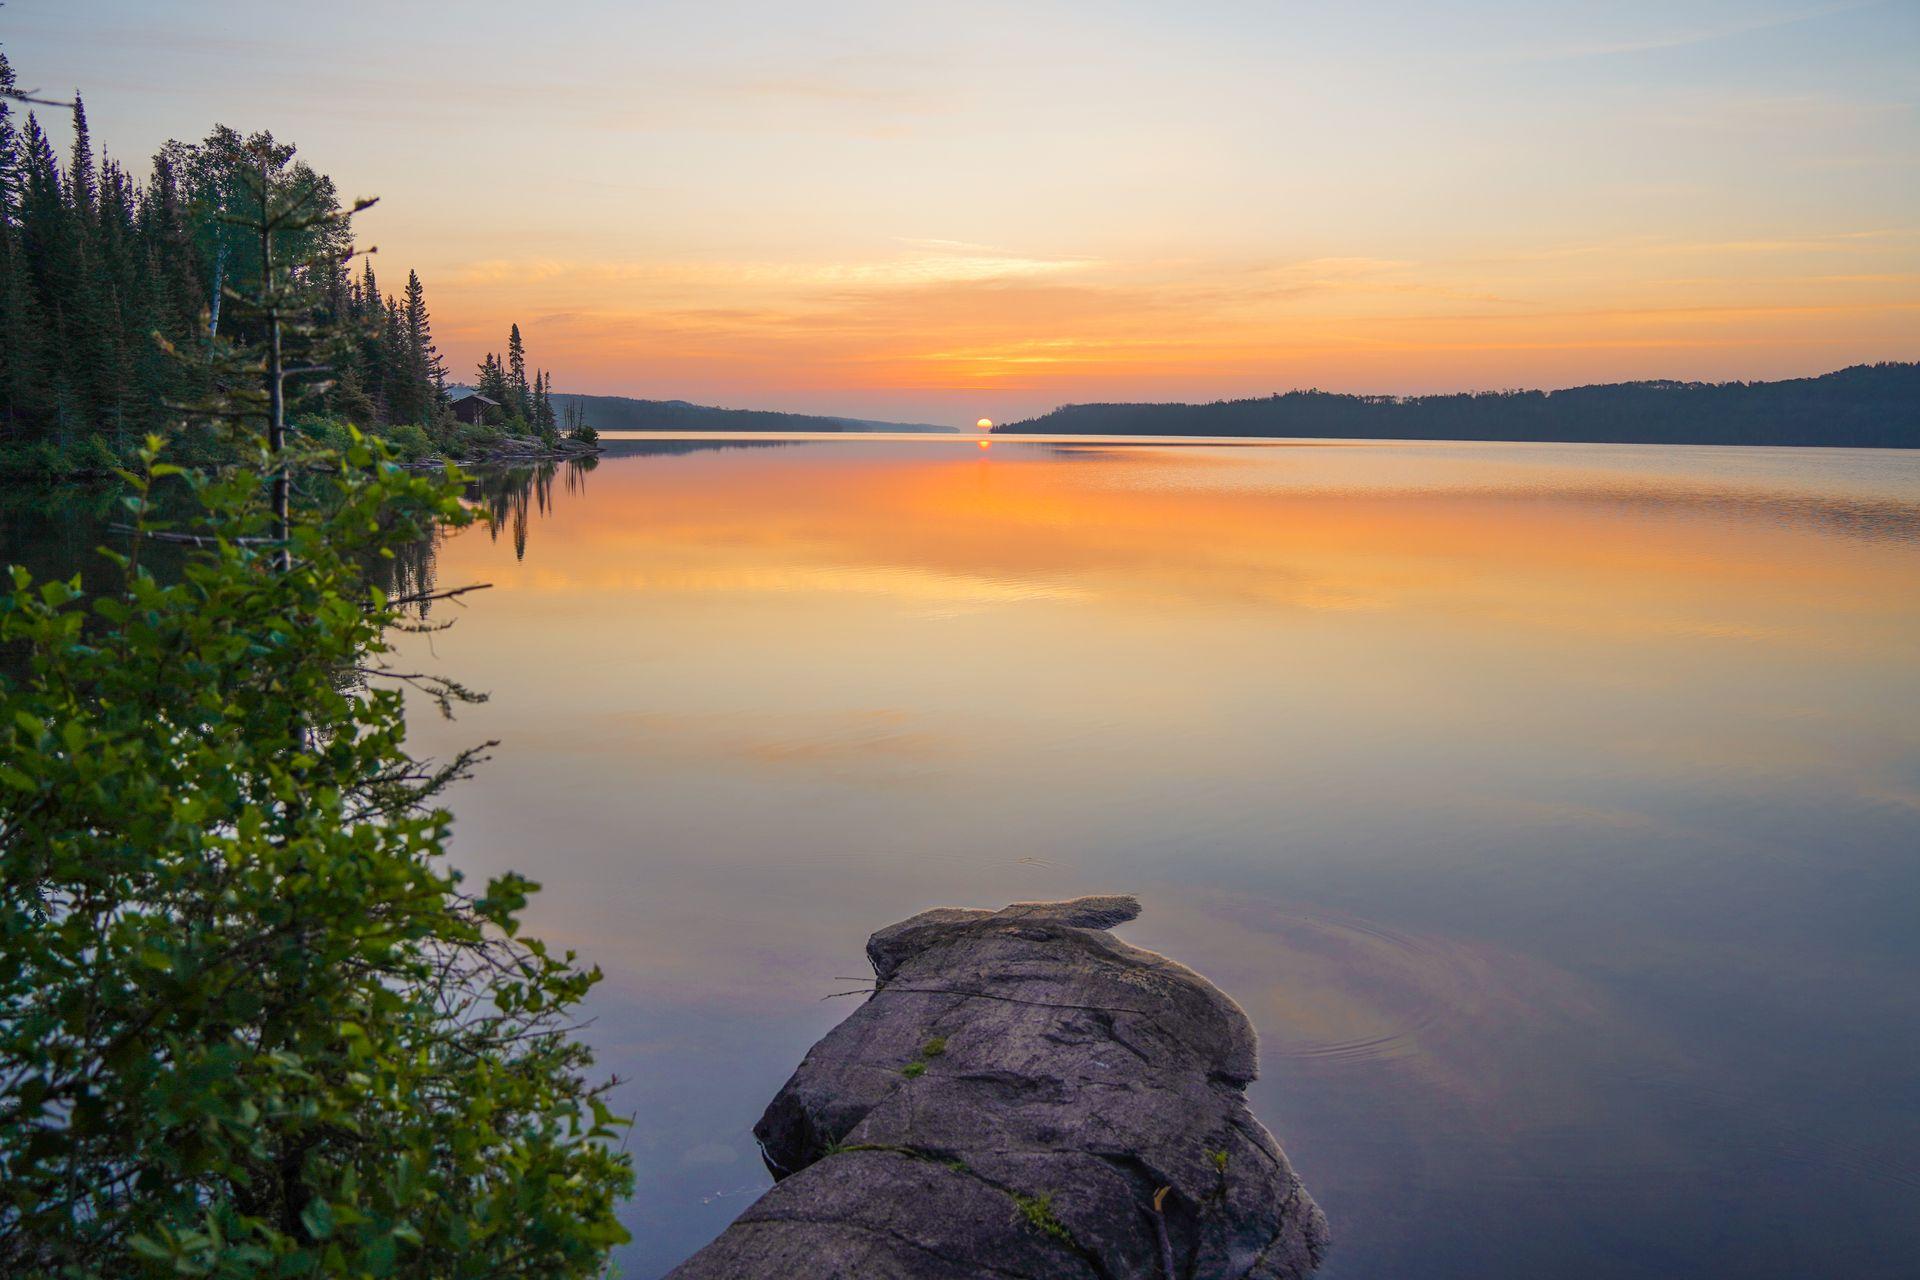 Watching the sunrise from a Moskey Basin campsite in Isle Royale. There is a rock extends out into the water at the center of the photo.